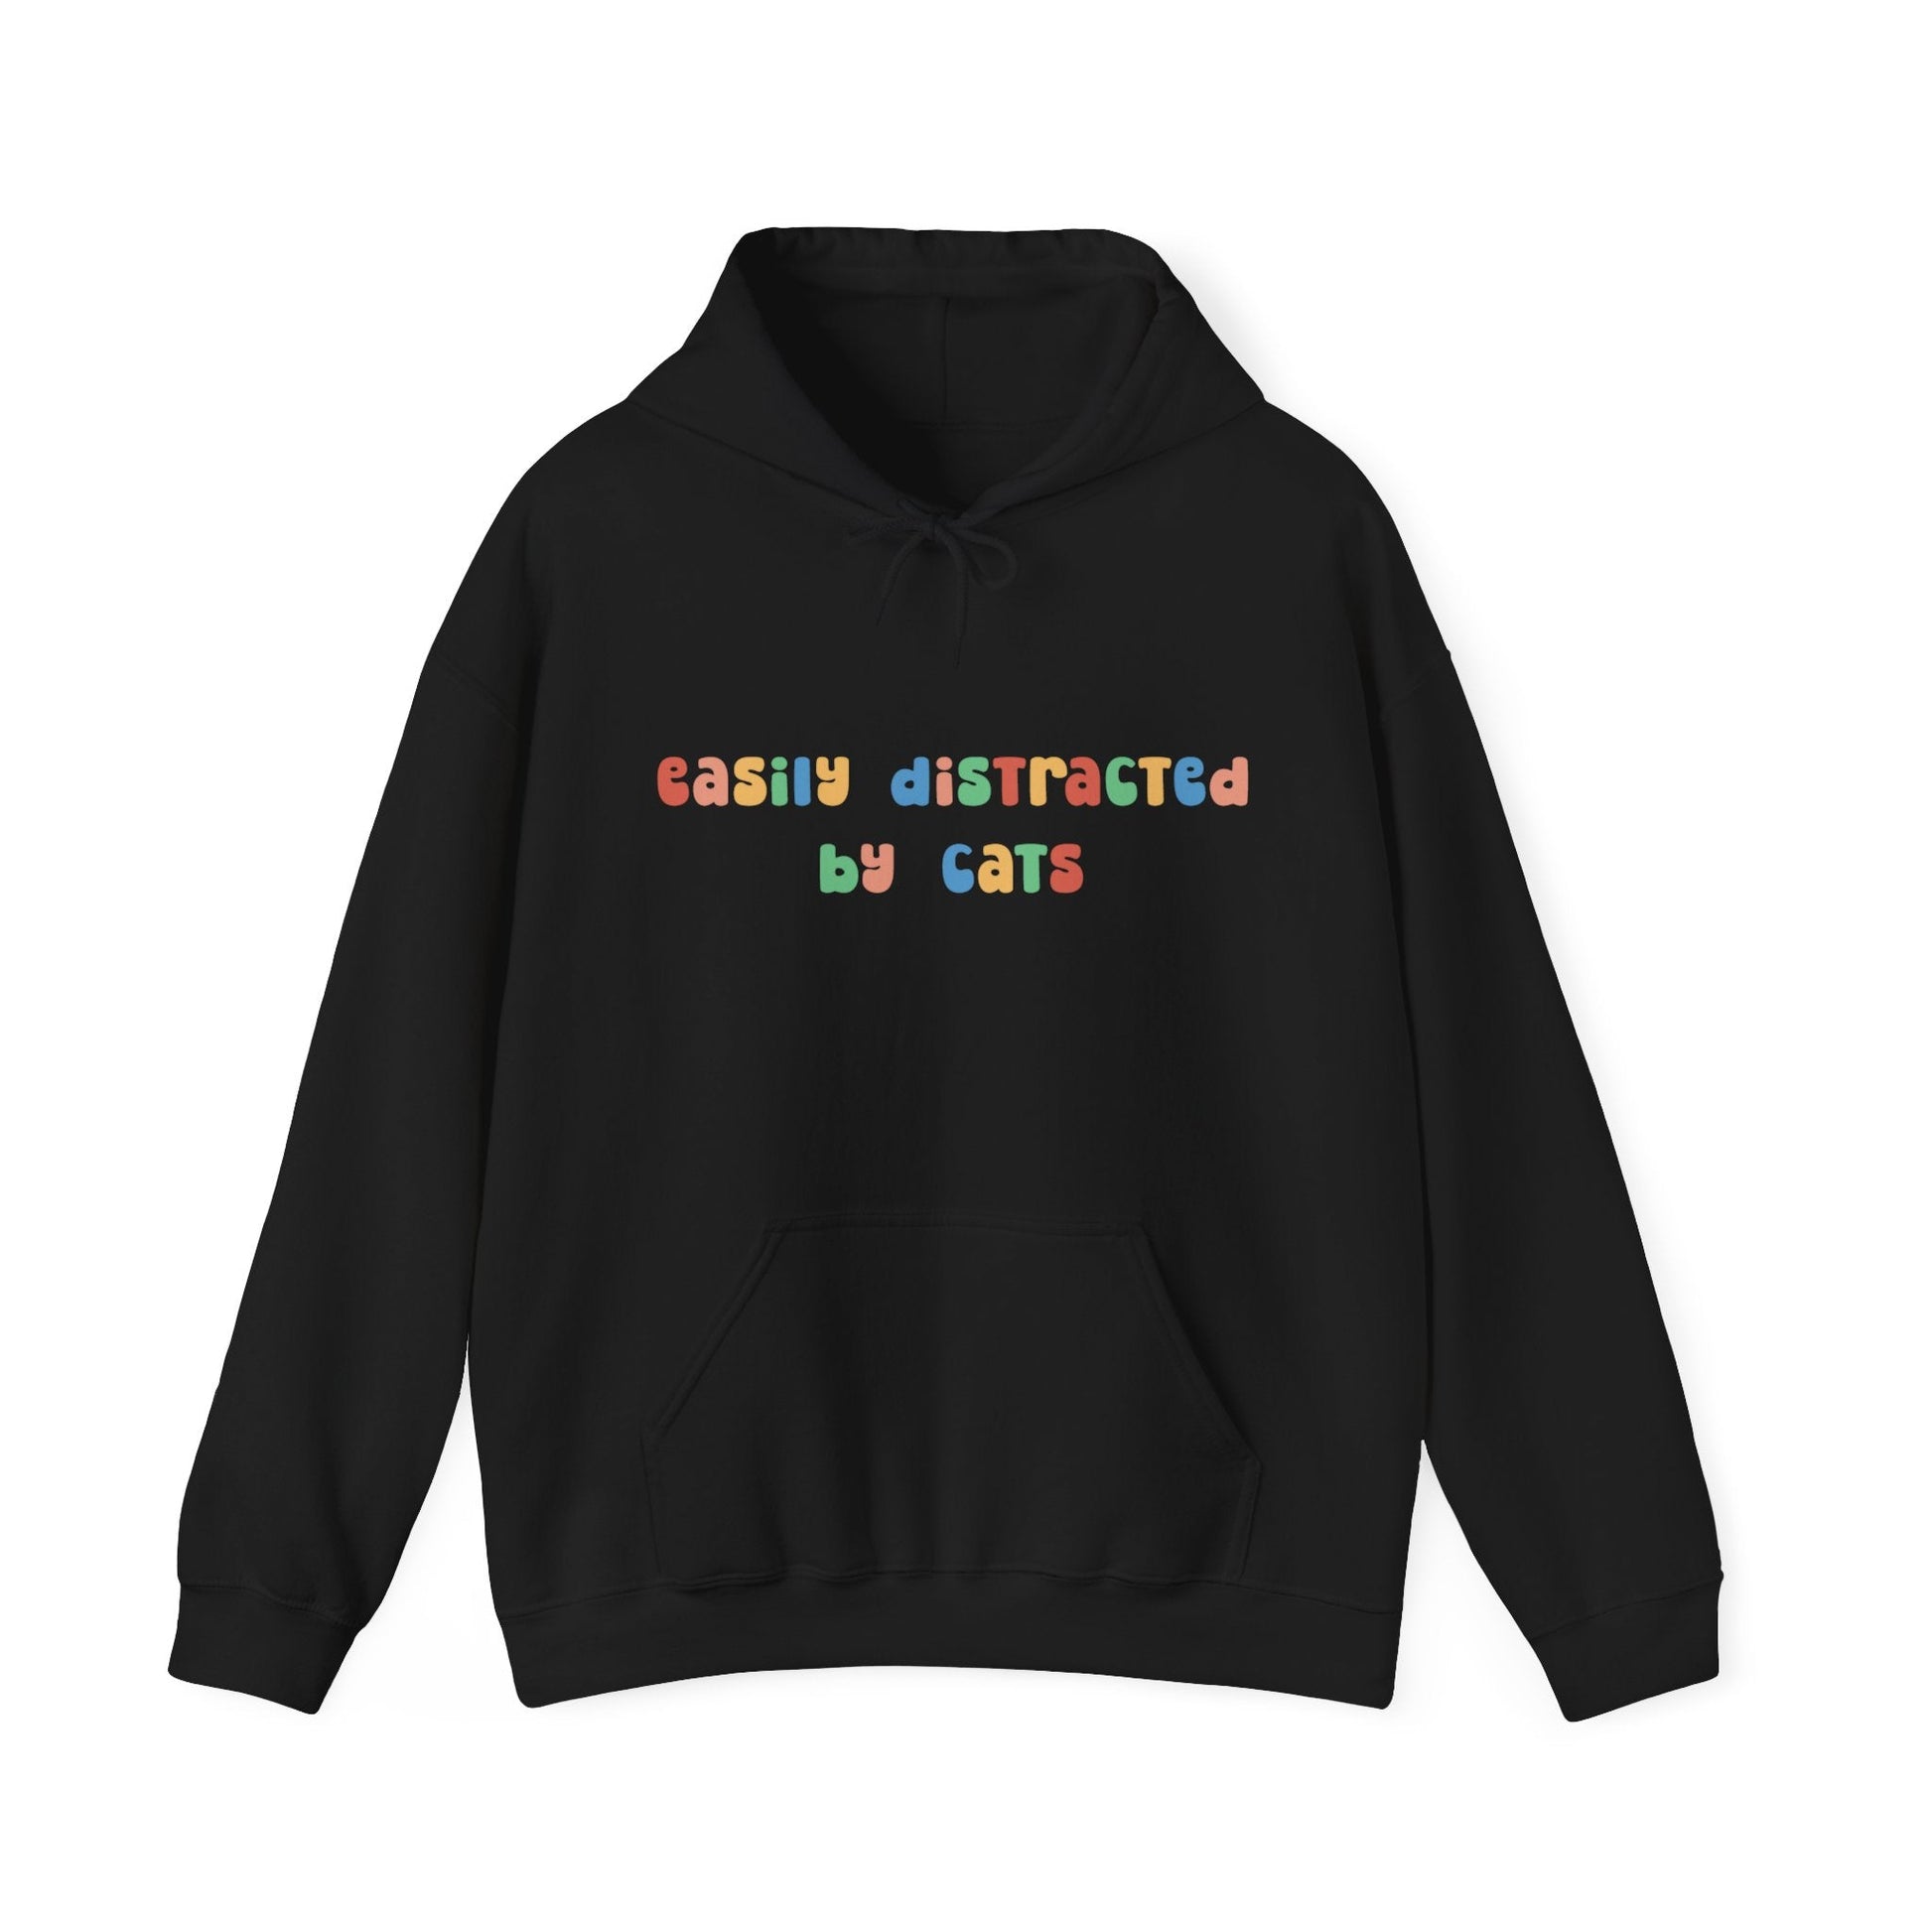 Easily Distracted by Cats | Hooded Sweatshirt - Detezi Designs-14004750990063963366